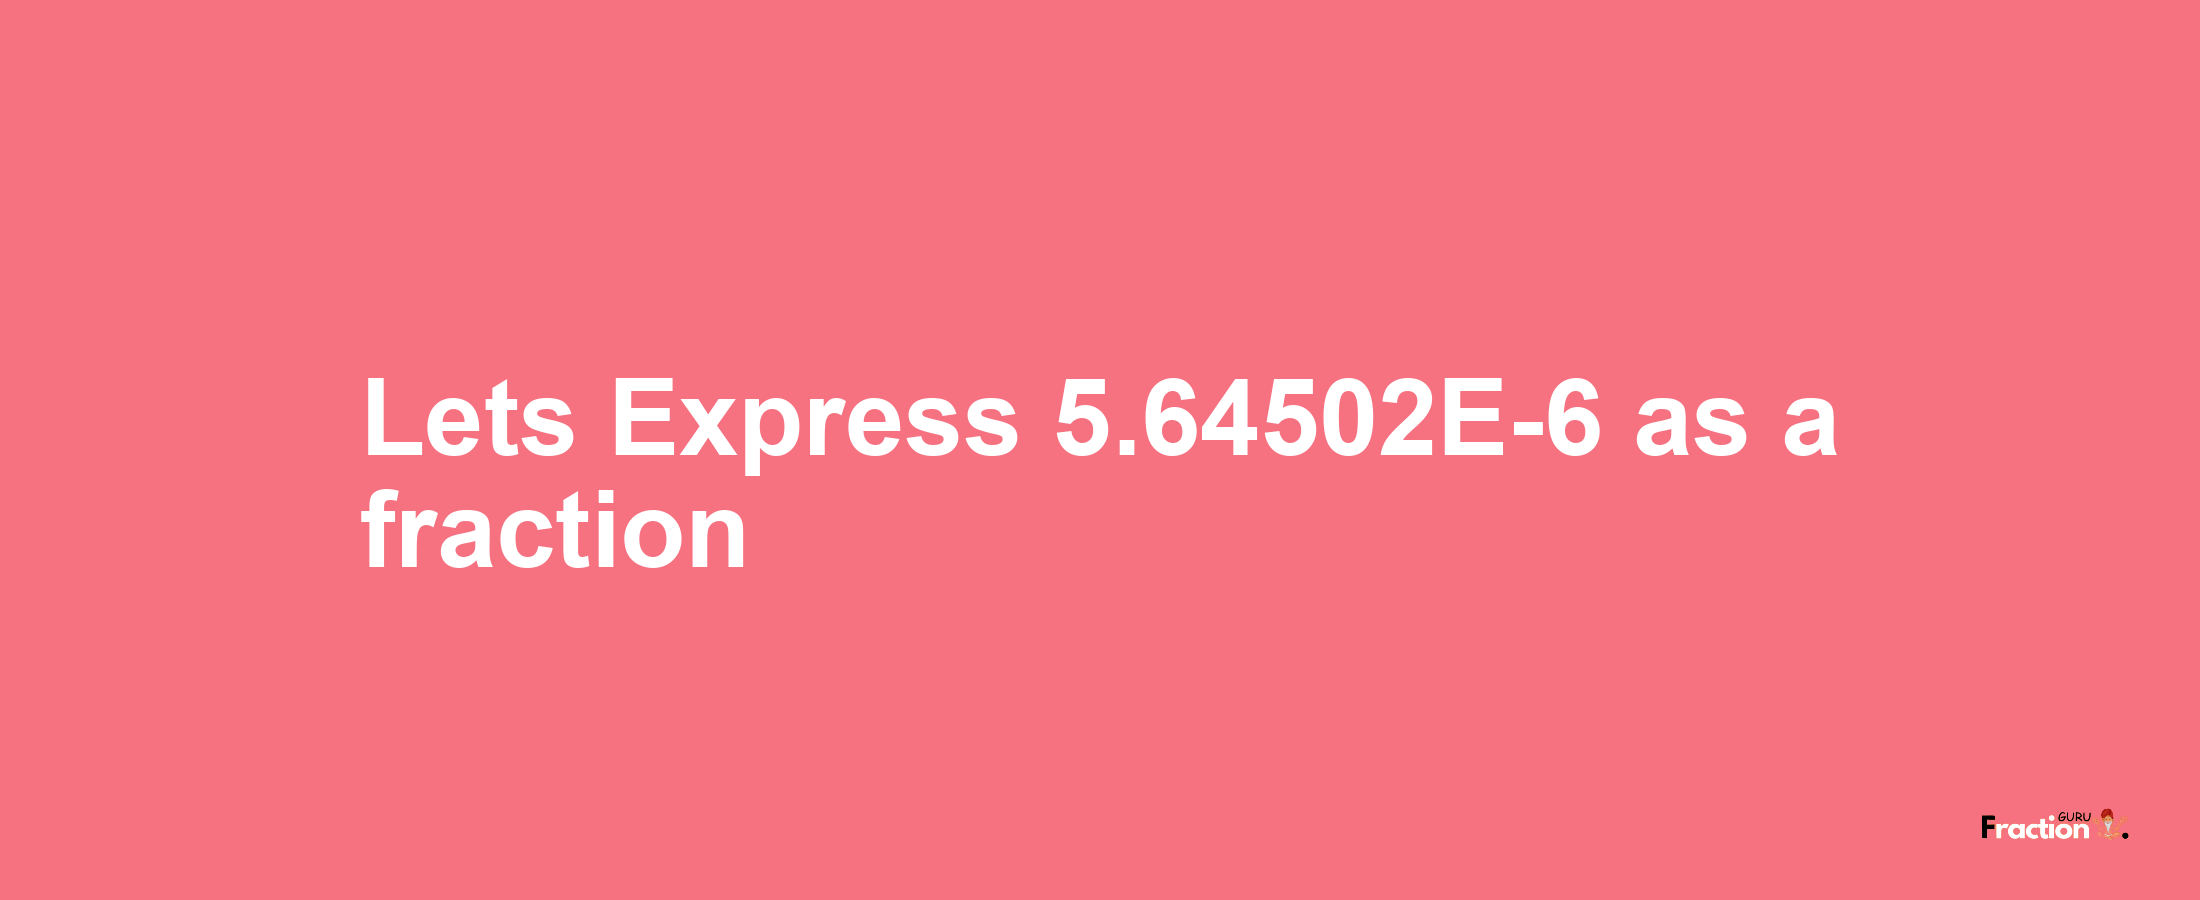 Lets Express 5.64502E-6 as afraction